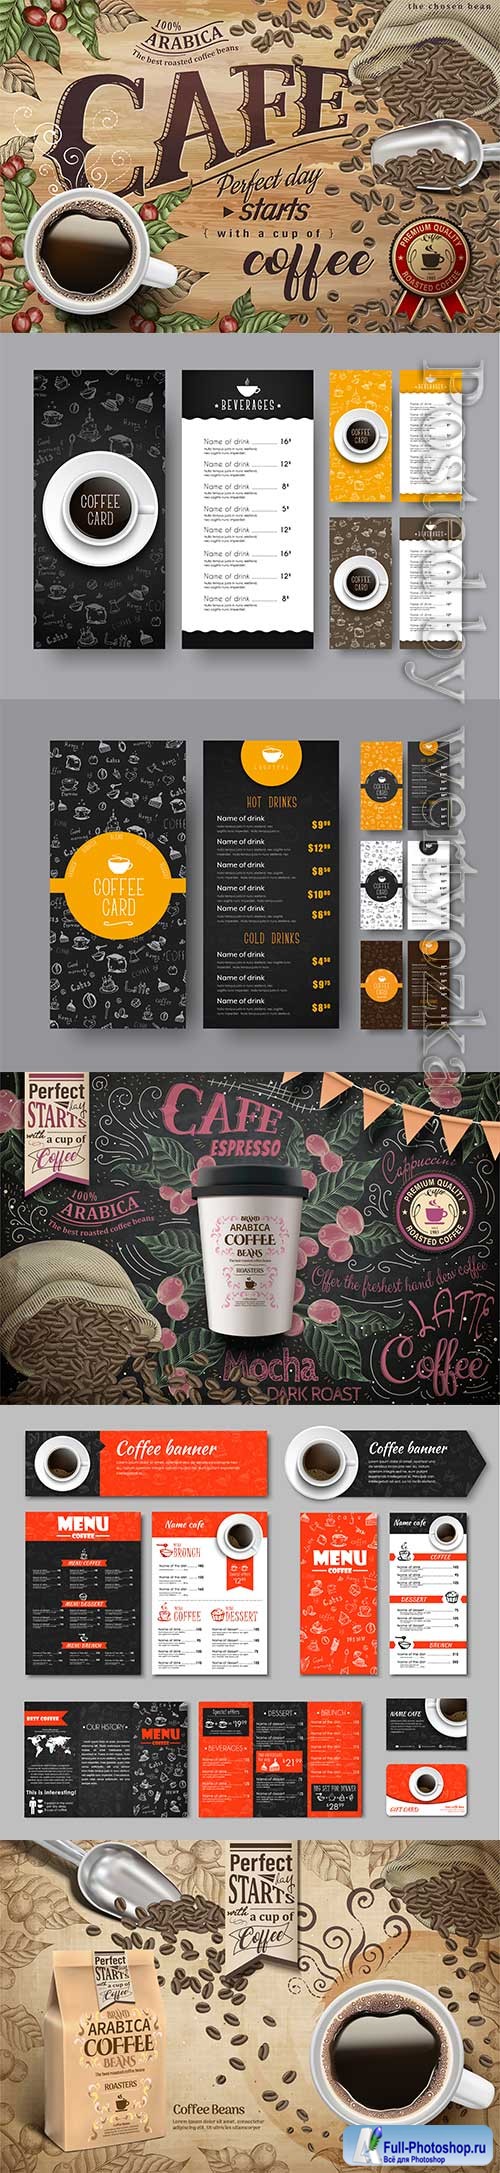 Template of the coffee menu for a cafe or restaurant